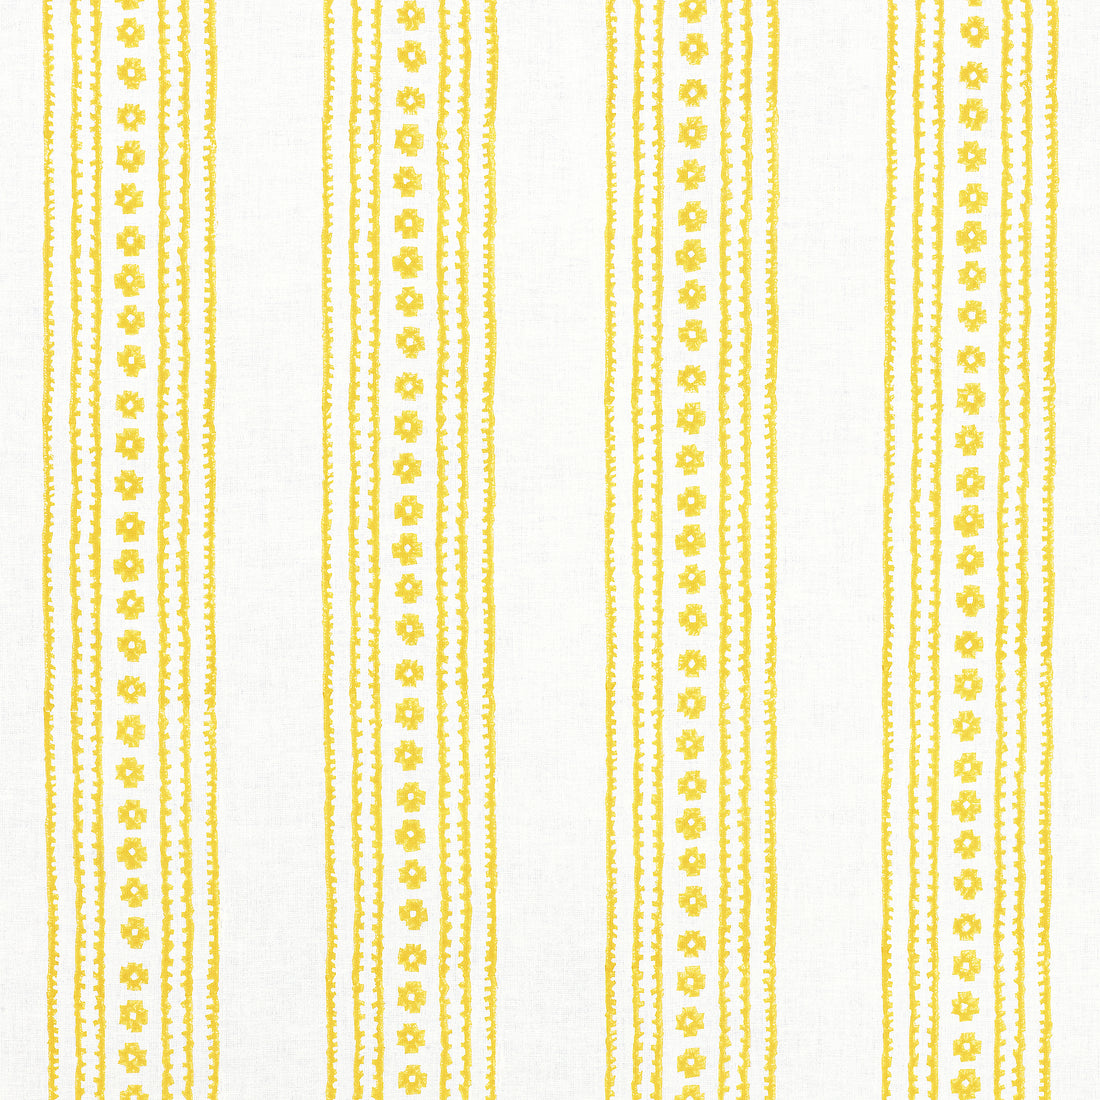 New Haven Stripe fabric in yellow color - pattern number F910610 - by Thibaut in the Ceylon collection